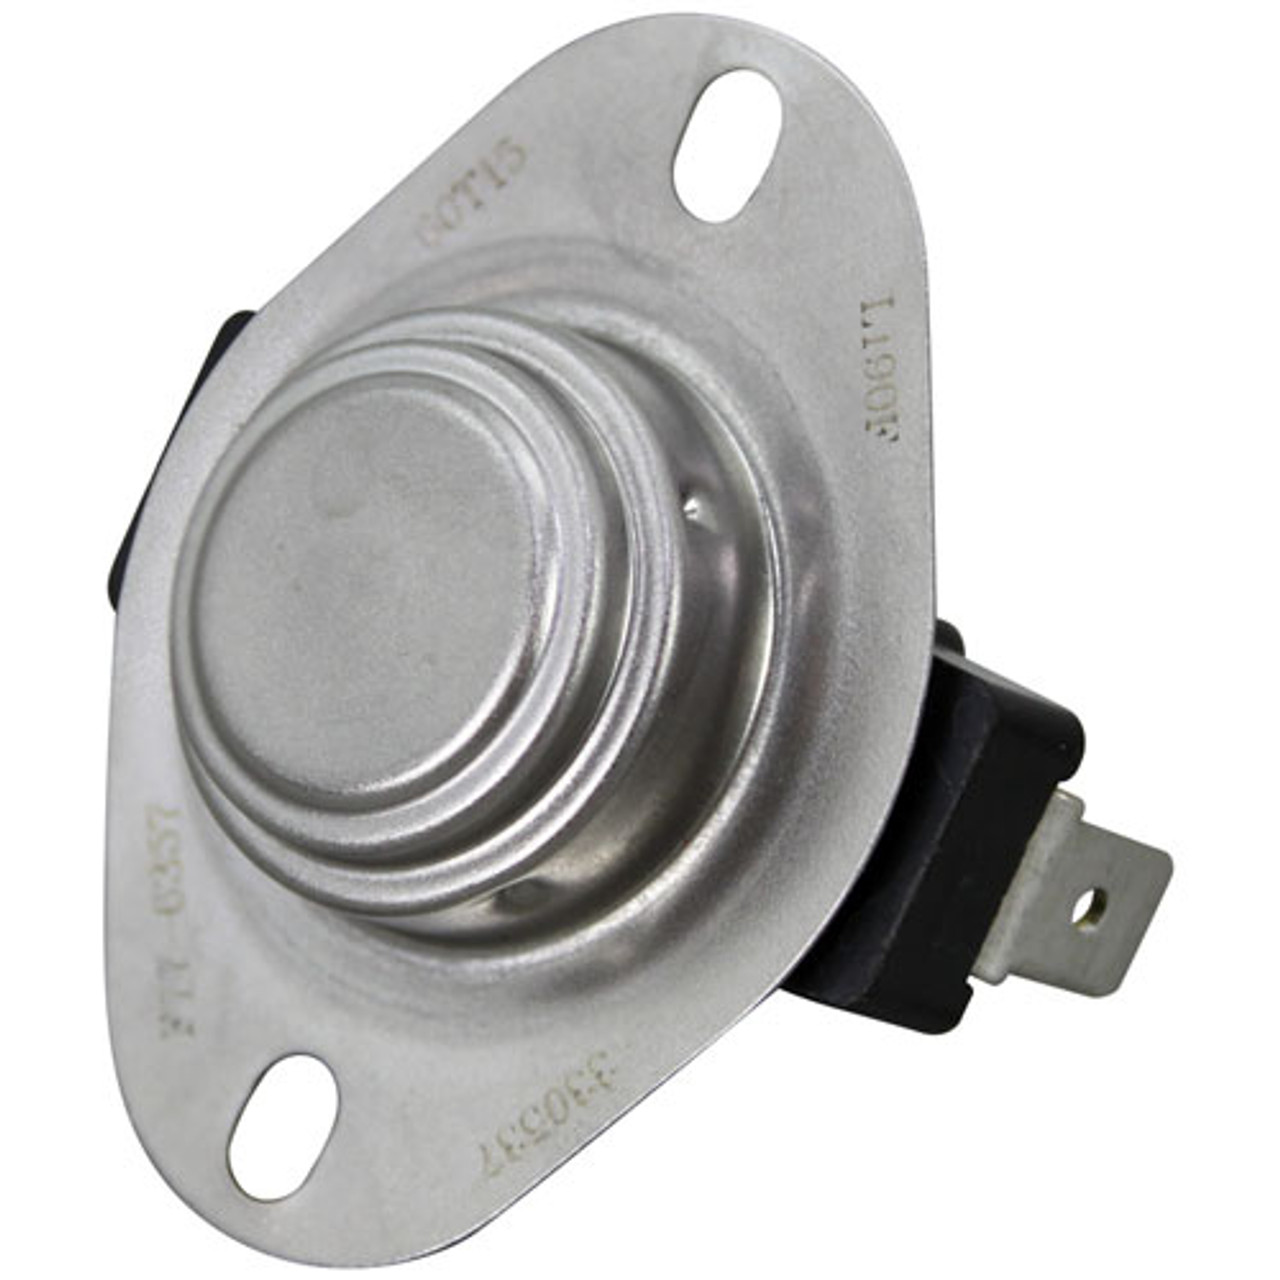 Limit Switch - Replacement Part For Star Mfg 2E-200542